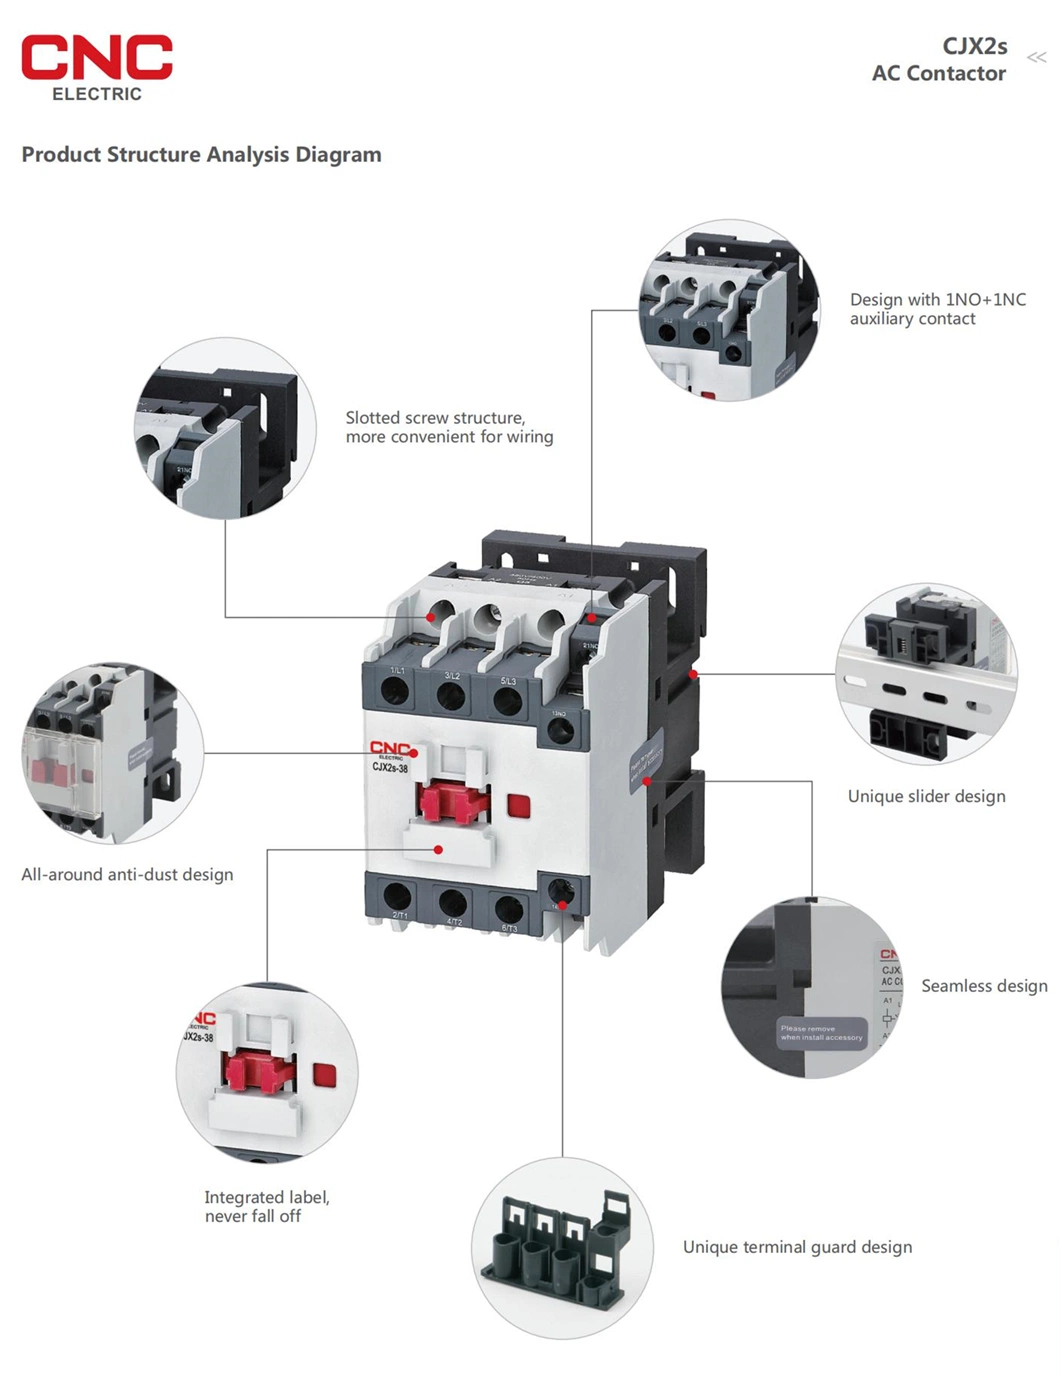 CNC New Arrival Cjx2s Series 3 Phase AC Magnetic Electric 9A-95A Contactor with CE CB CCC TUV Certifications